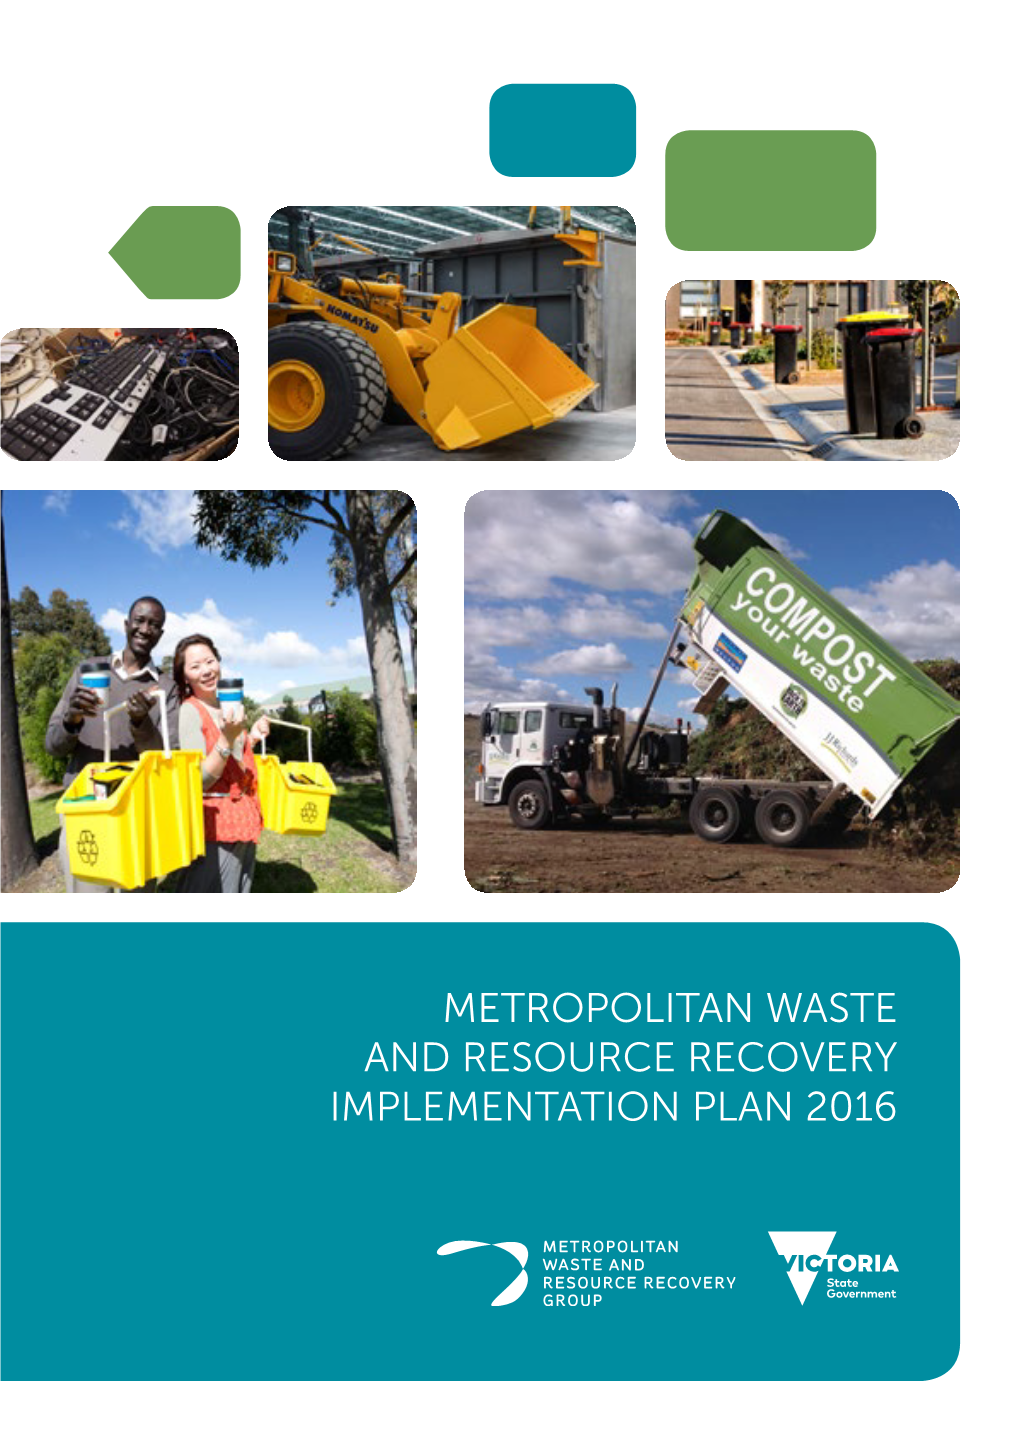 METROPOLITAN WASTE and RESOURCE RECOVERY IMPLEMENTATION PLAN 2016 Published by the Metropolitan Waste and Resource Recovery Group September 2016